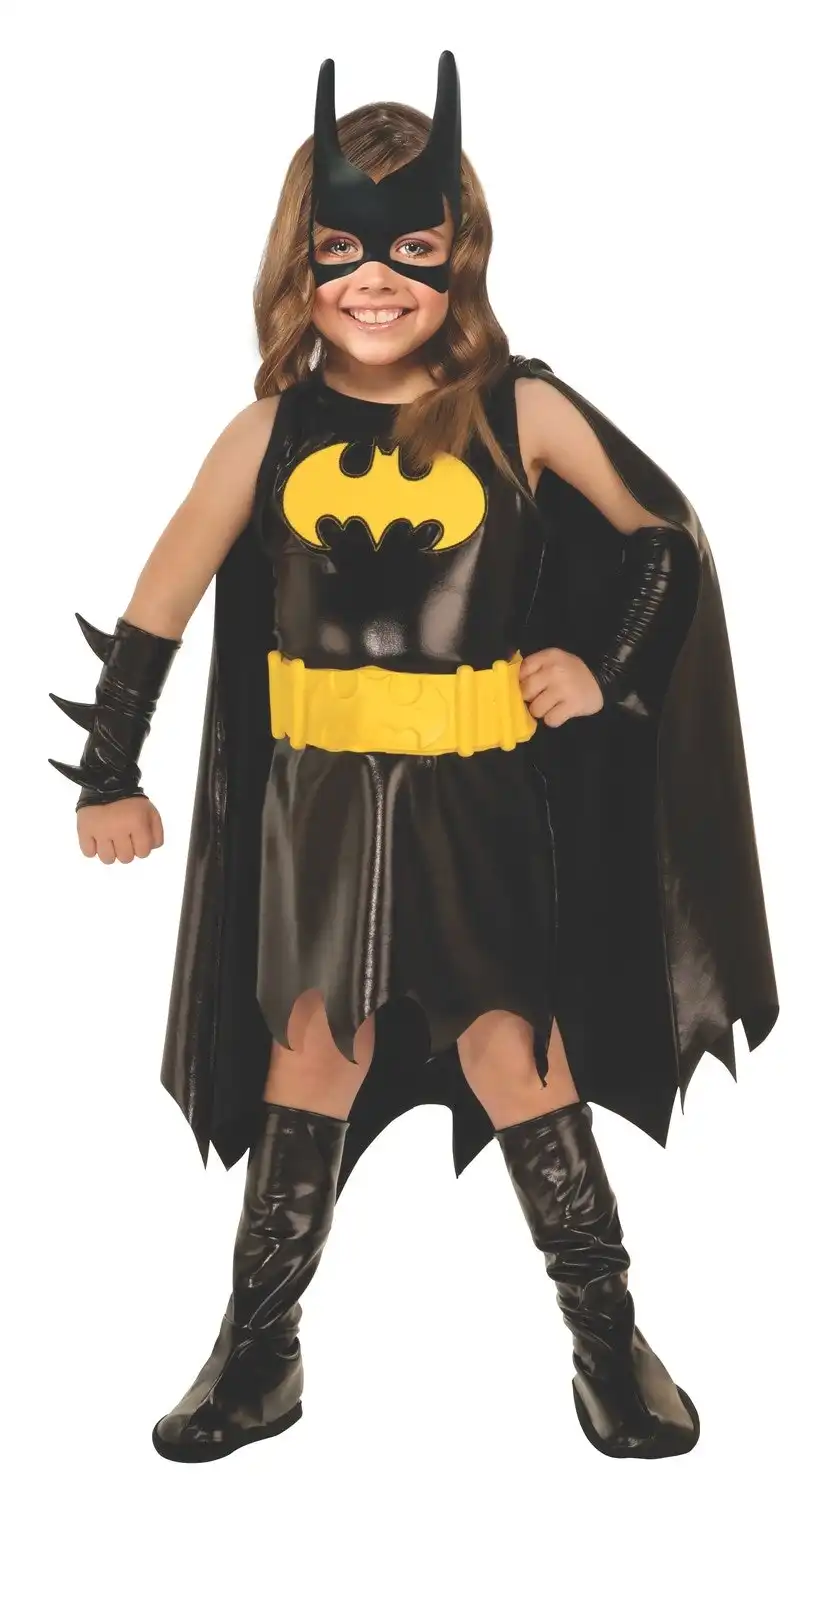 DC Comics Character Batgirl Dress Up Party Costume - Size Unisex Toddler/Baby